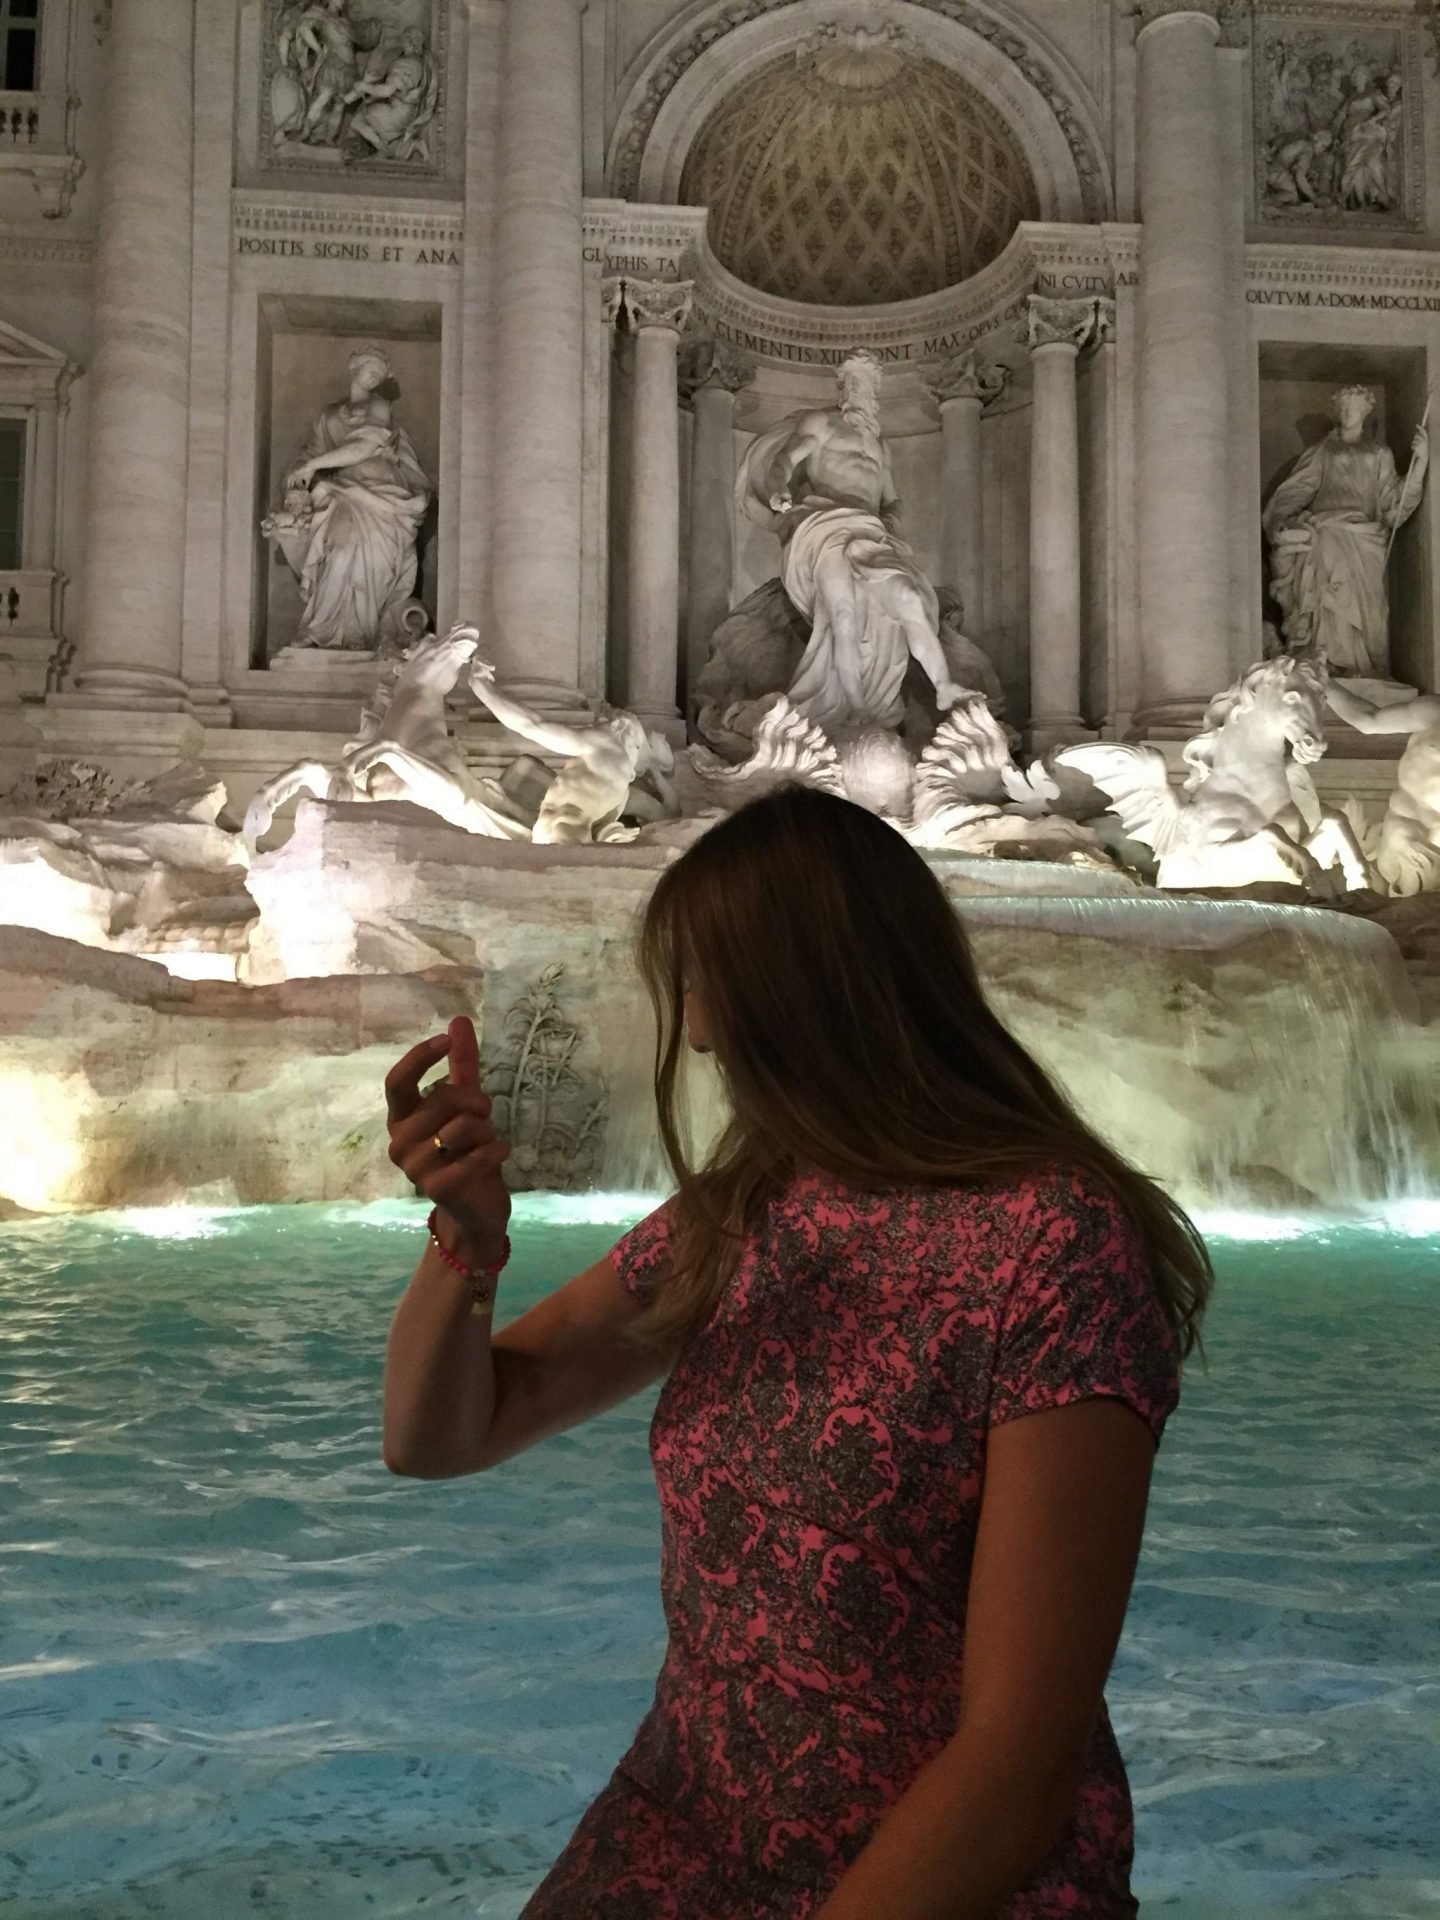 Throwing the coin in the Trevi Fountain, Rome